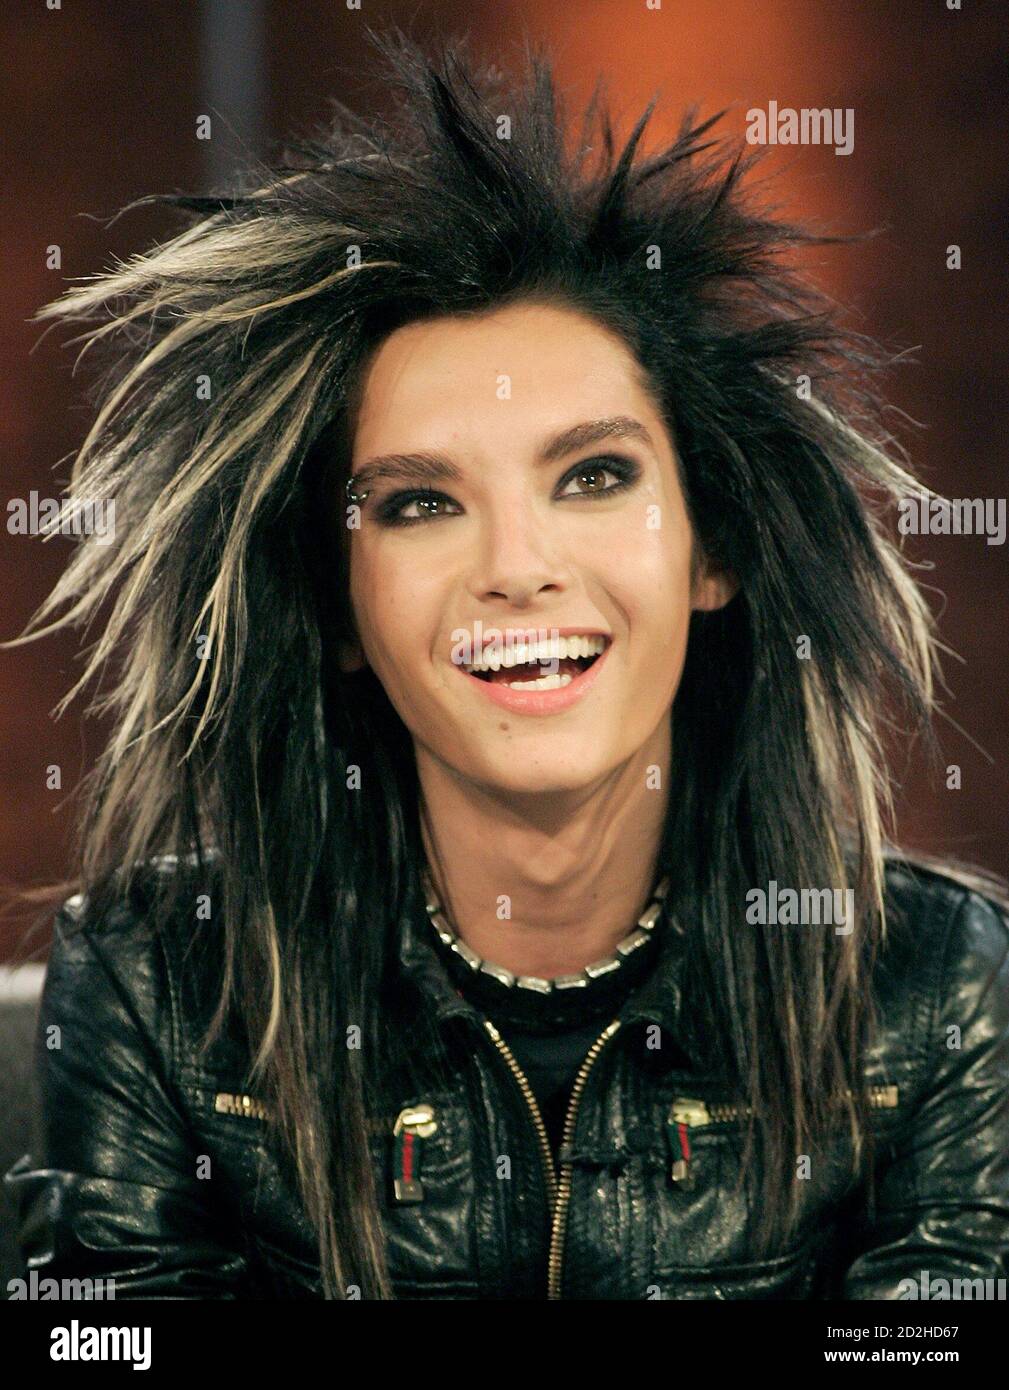 Lead singer of the German pop group 'Tokio Hotel' Bill Kaulitz smiles  during the German television show 'Wetten, dass..?' (Bet it..?) in the  southern German town of Friedrichshafen, January 20, 2007. REUTERS/Alexandra